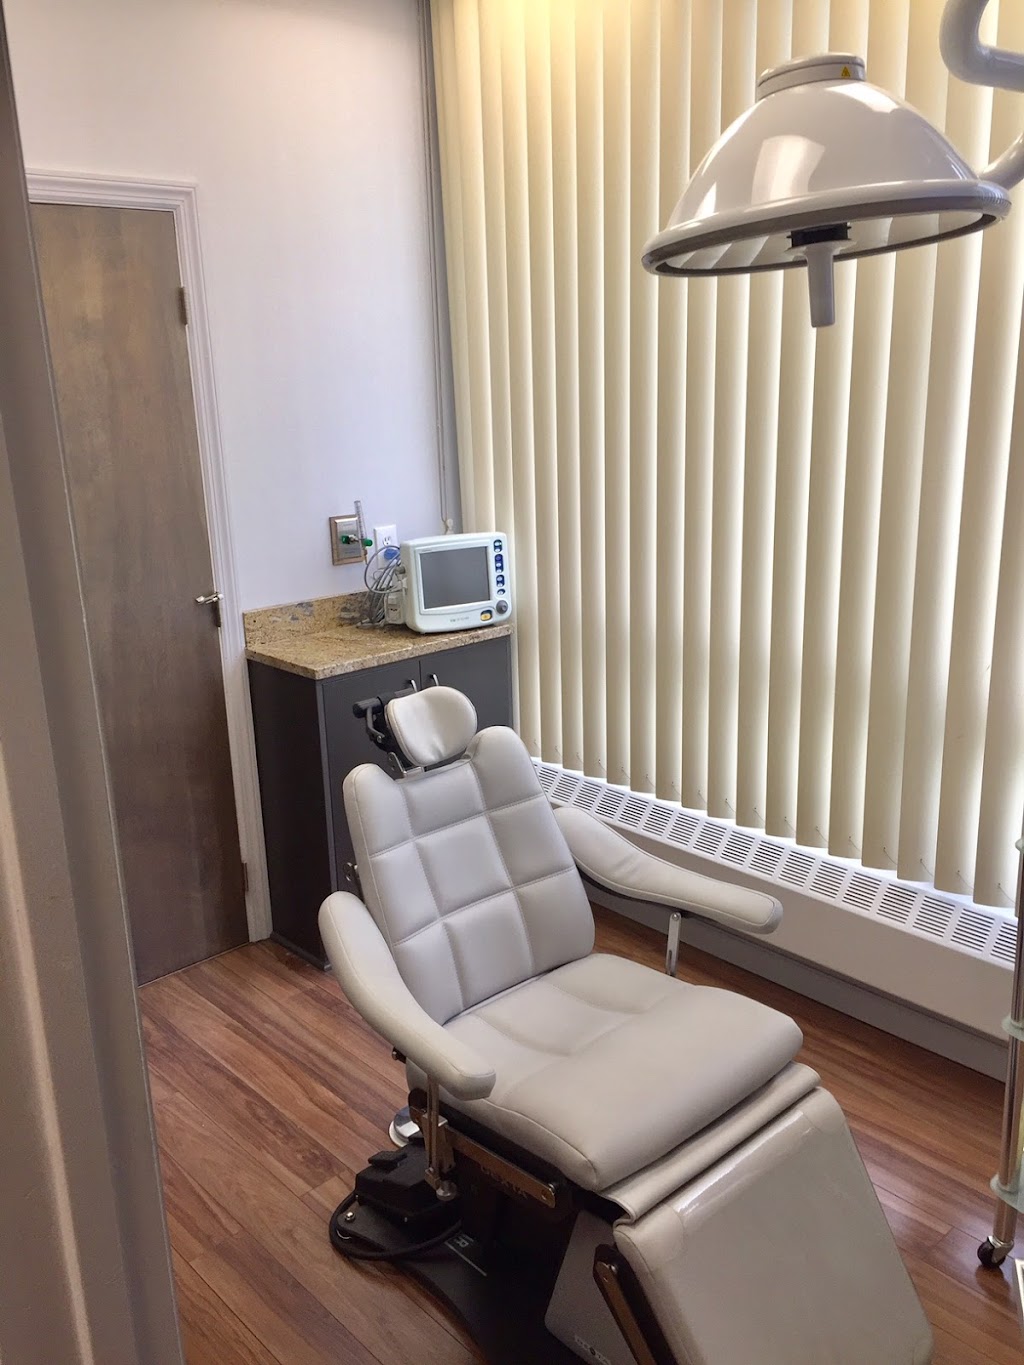 Northern Westchester Oral Surgery | 55 W Red Oak Ln, West Harrison, NY 10604 | Phone: (914) 241-4800